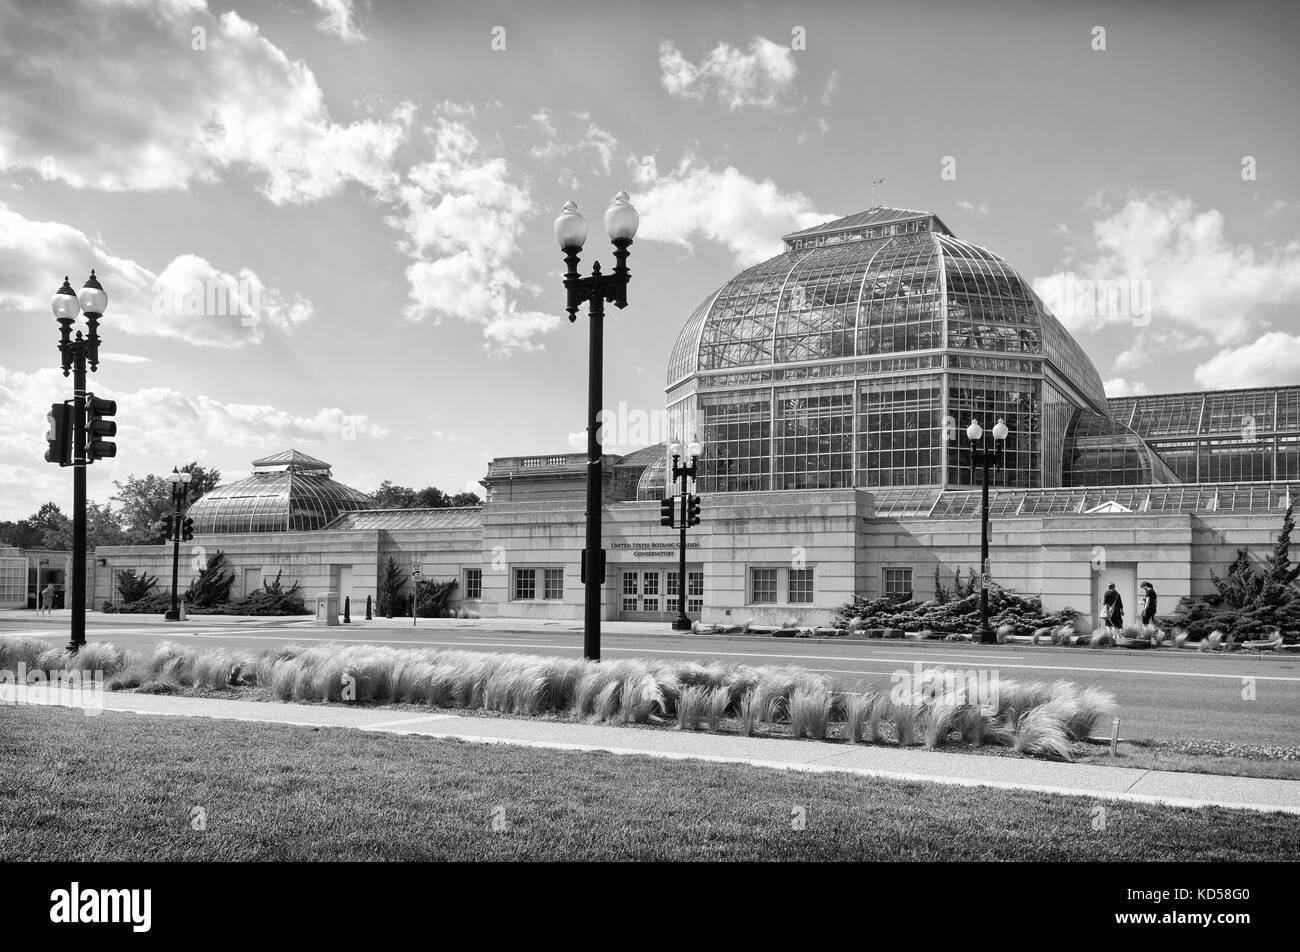 Washington DC Botanic Garden Conservatory in black and white. View of the exterior against dramatic clouds Stock Photo